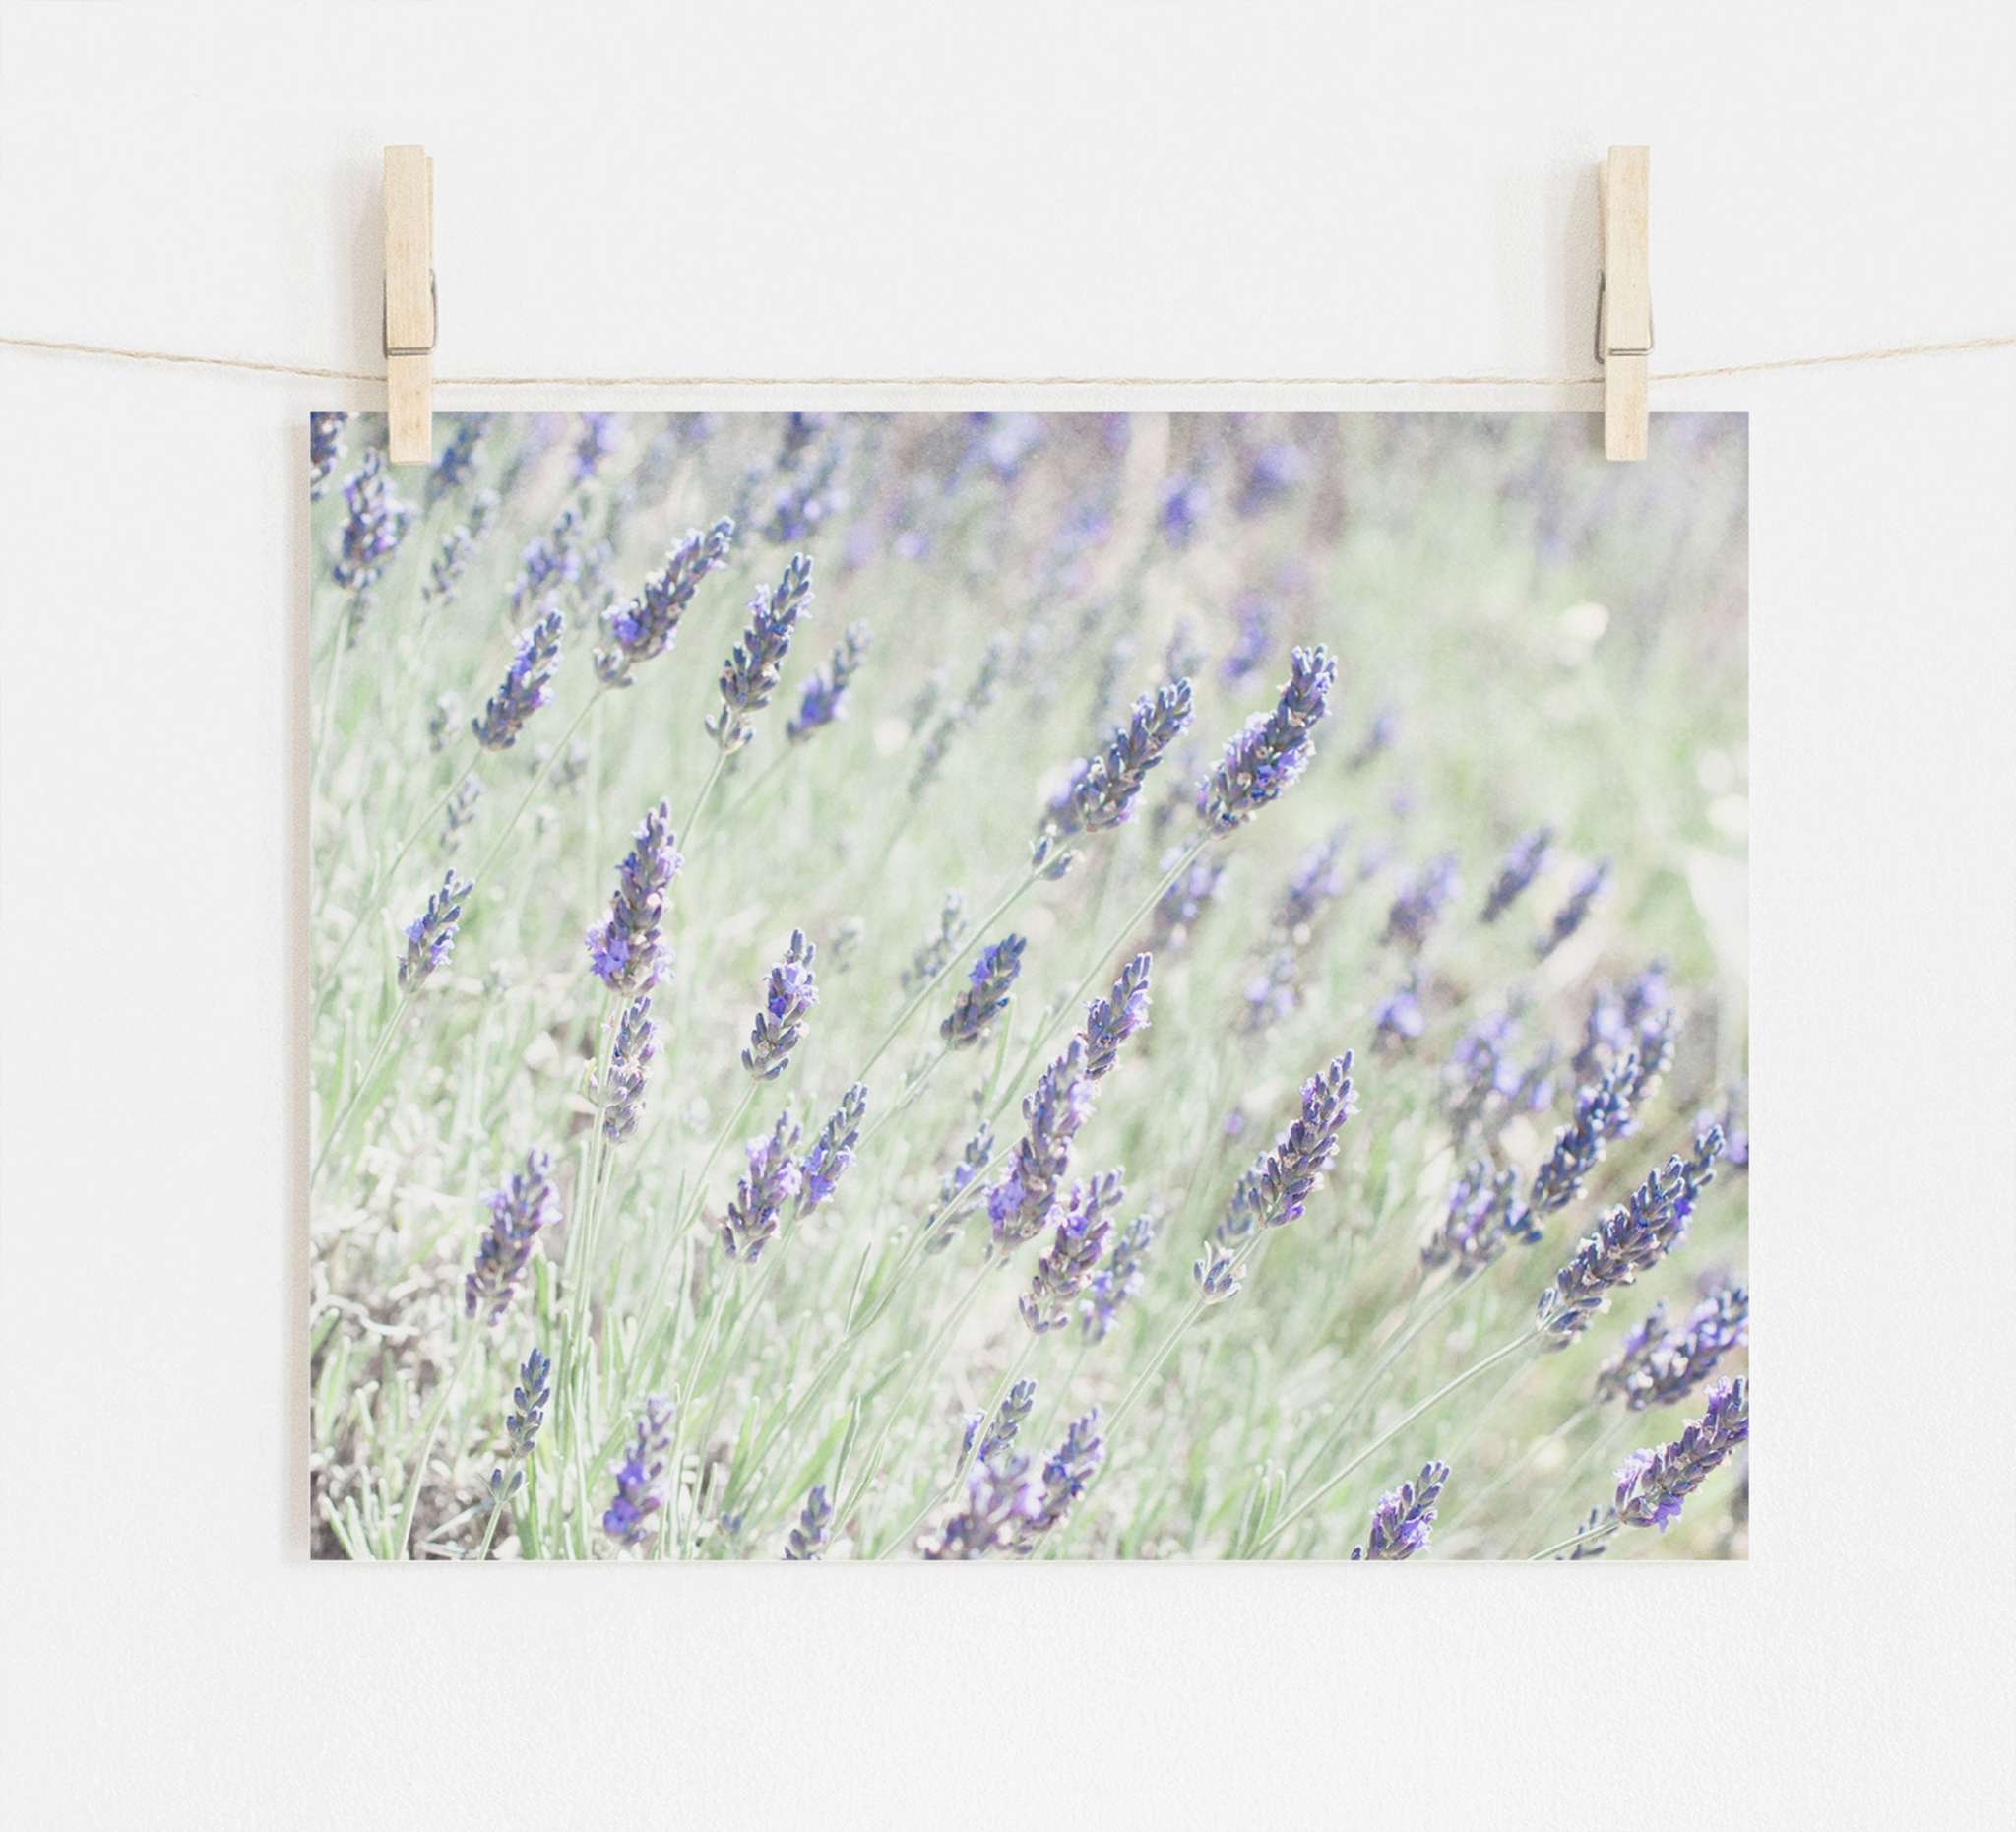 A photograph of a Floral Purple Print, 'Lavender for LaLa' printed on archival photographic paper, pinned to a string with wooden clothespins on a plain, bright background by Offley Green.